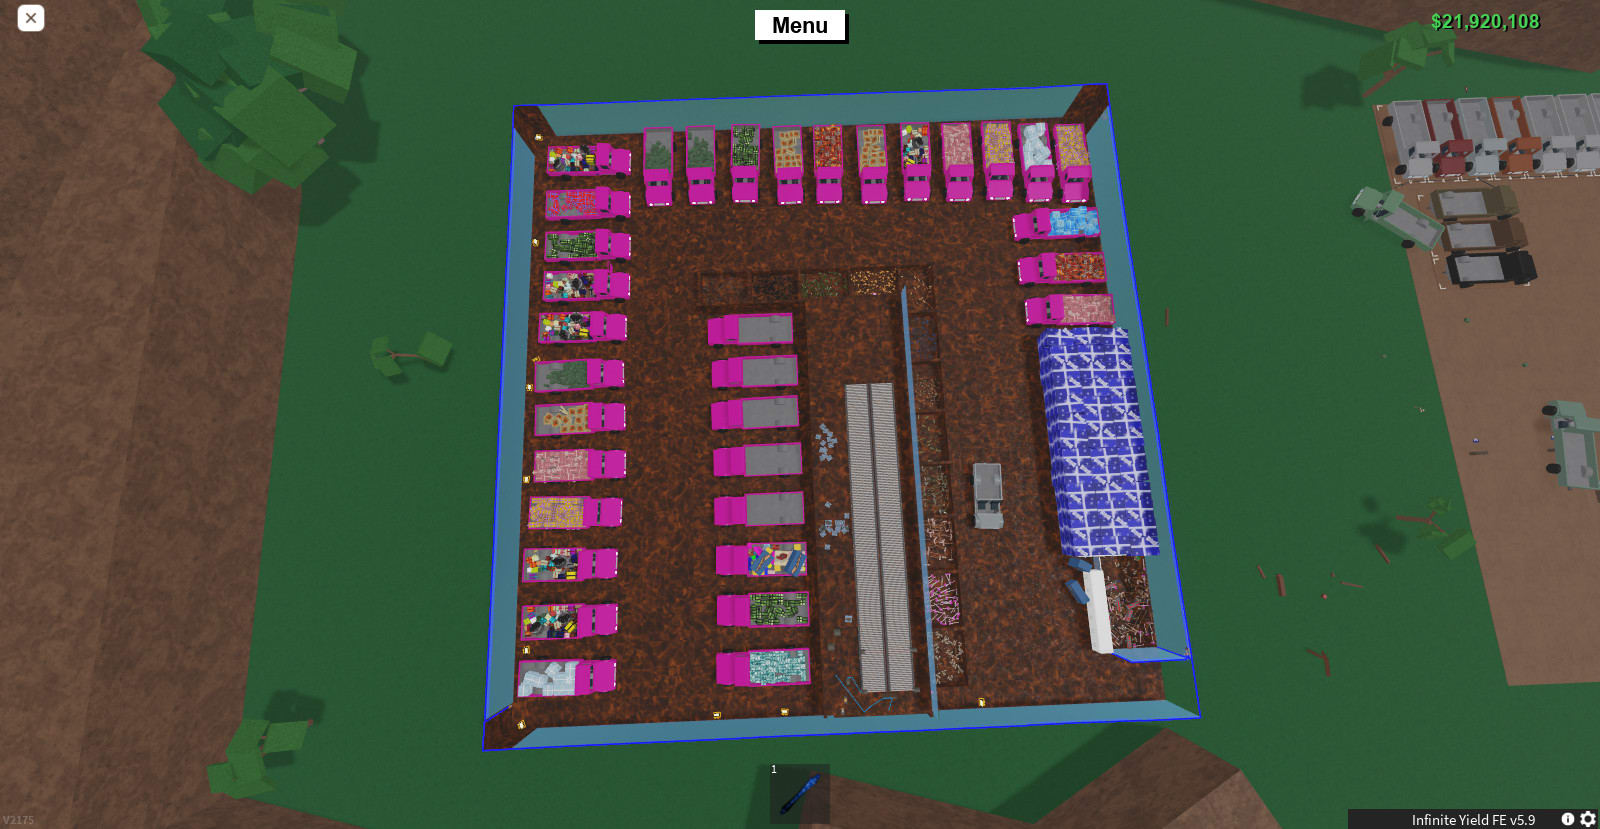 Give you modded wood in lumber tycoon 2 roblox by Srickman_jnr